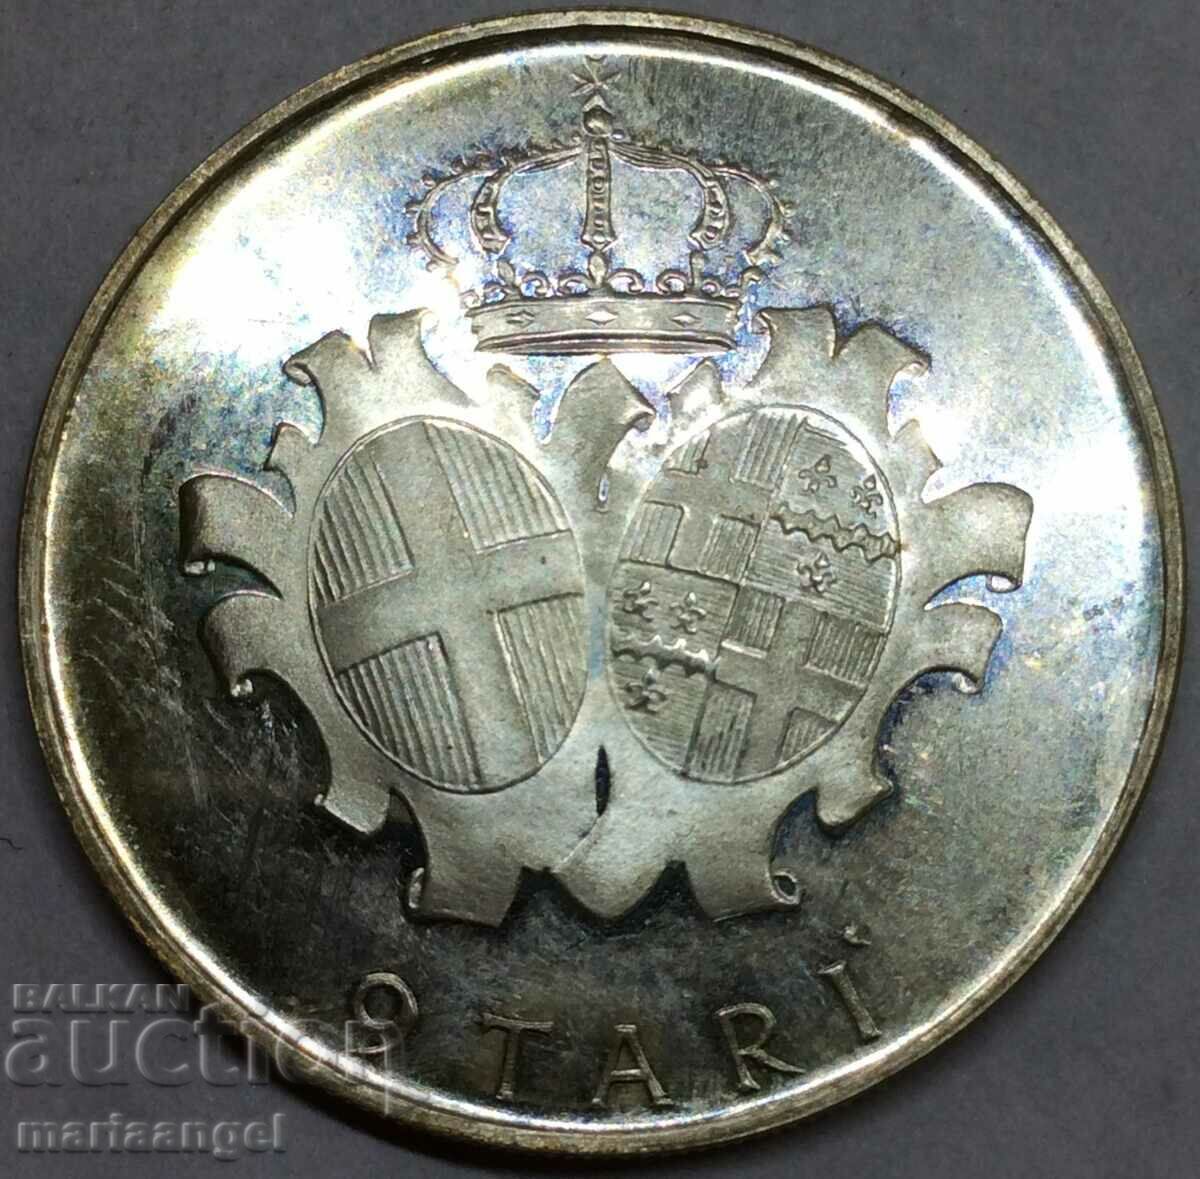 Malta 9 Tare 1972 PROOF UNC ORDER OF OF OF Arms - σπάνιο ασήμι